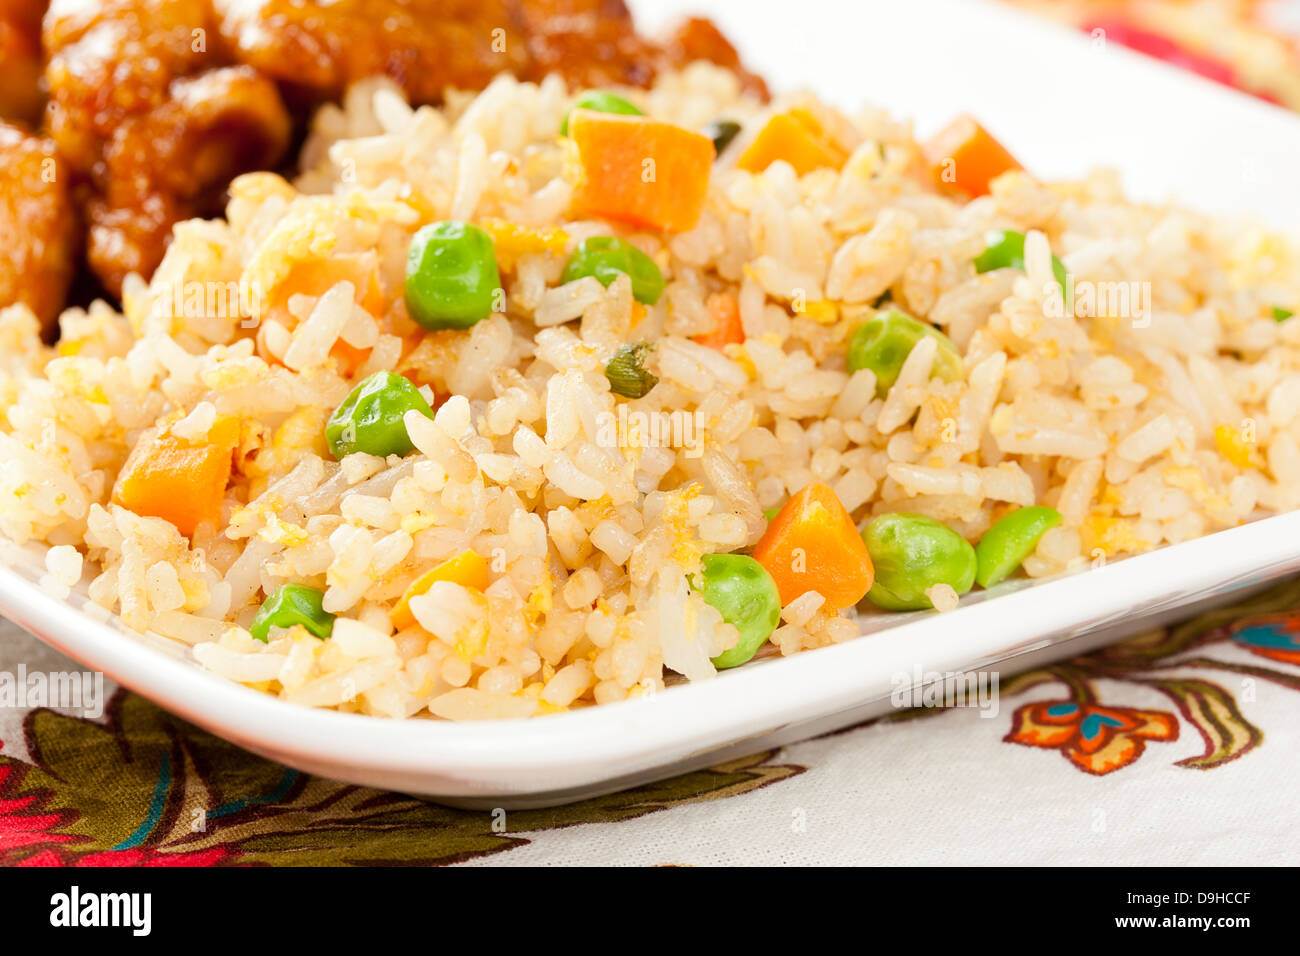 Homemade Fried Rice with peas and carrots Stock Photo